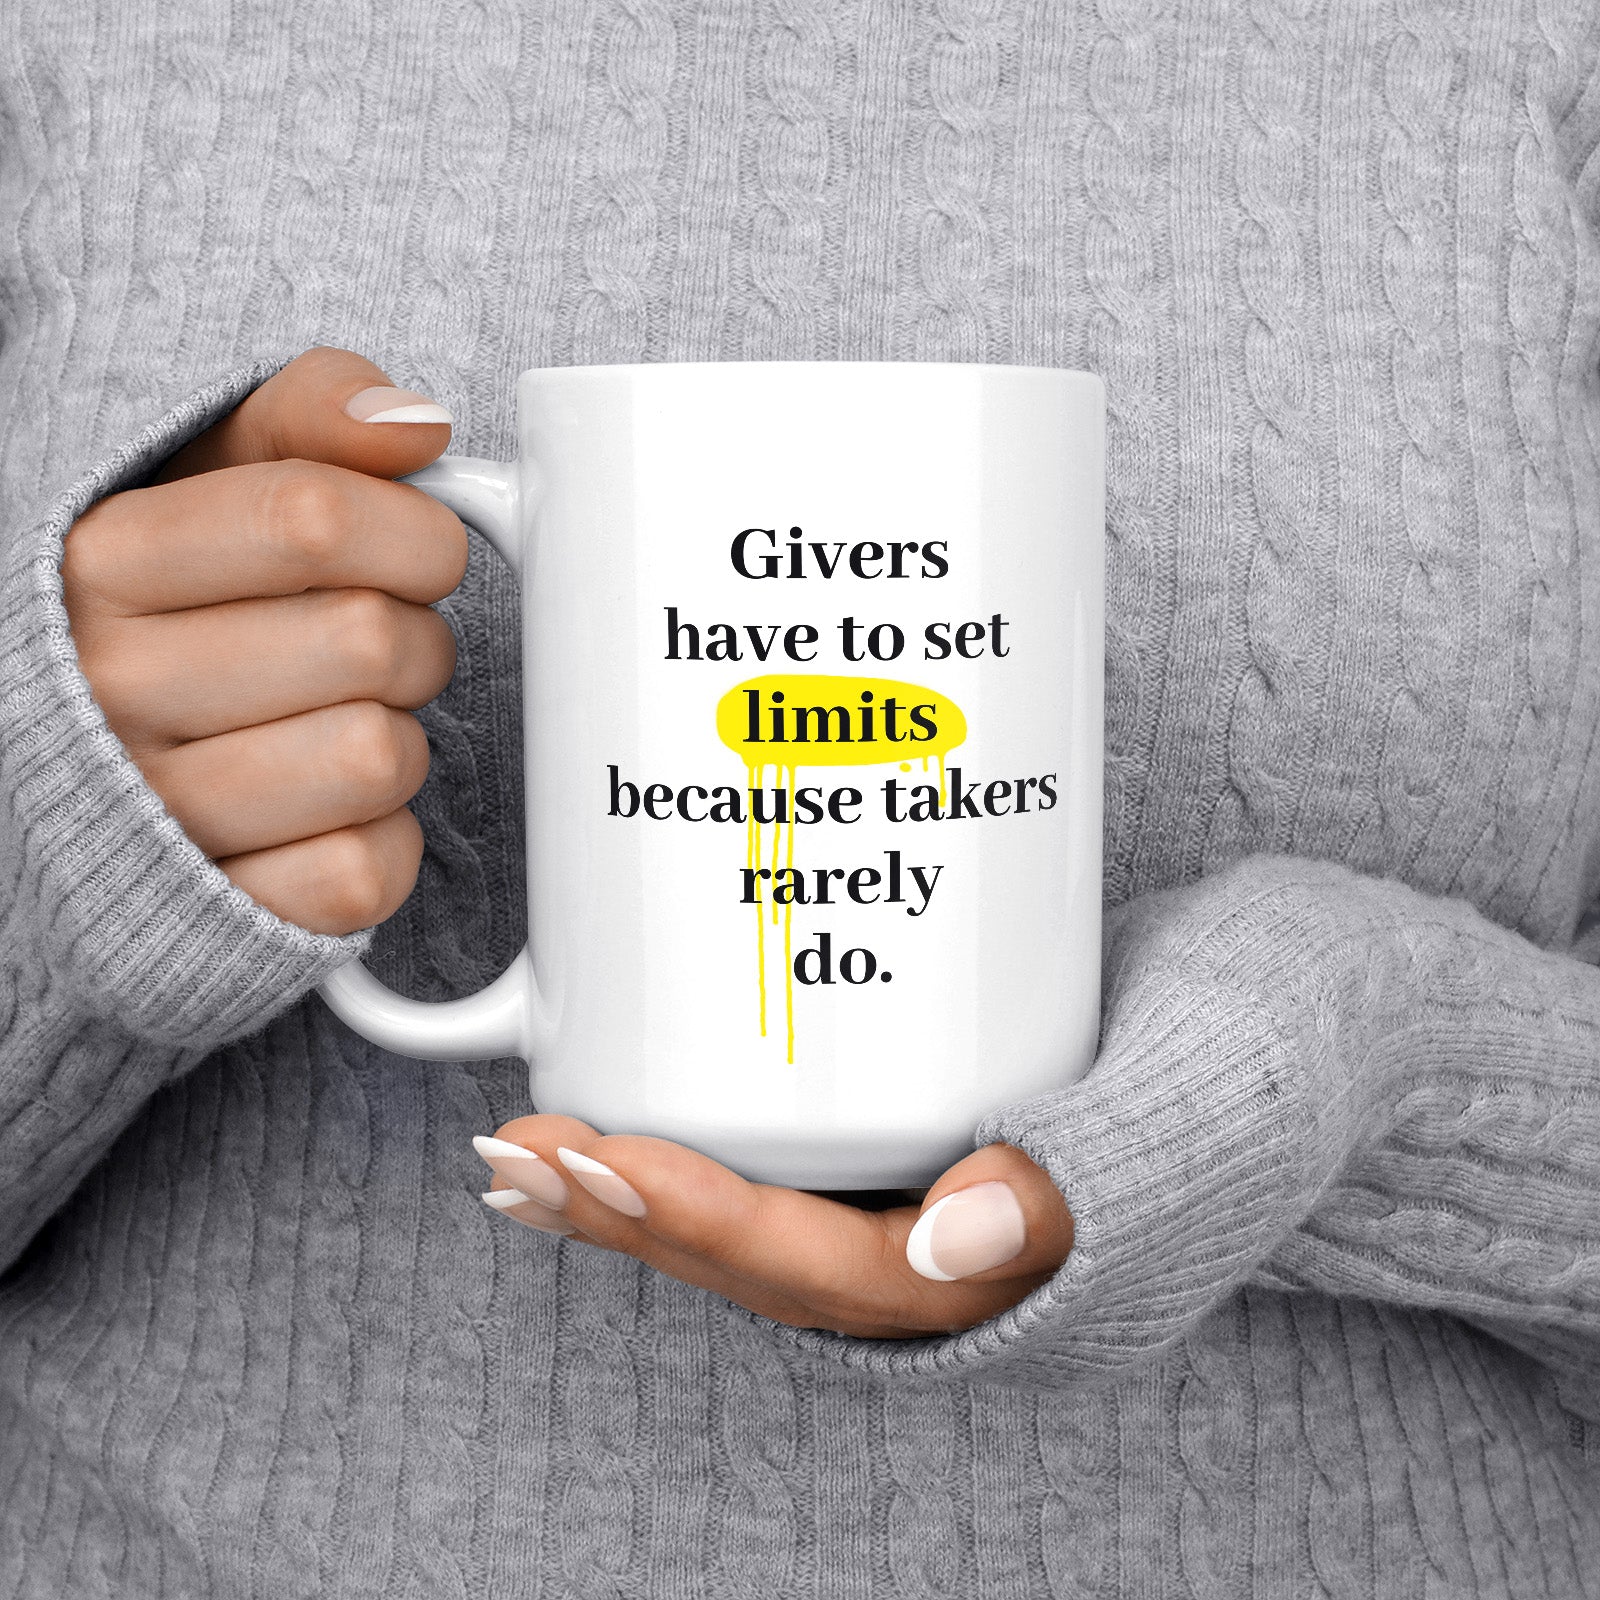 Be inspired by Henry Ford's famous quote, "Givers have to set limits because takers rarely do" on this white and glossy 15oz coffee mug with the handle on the left.